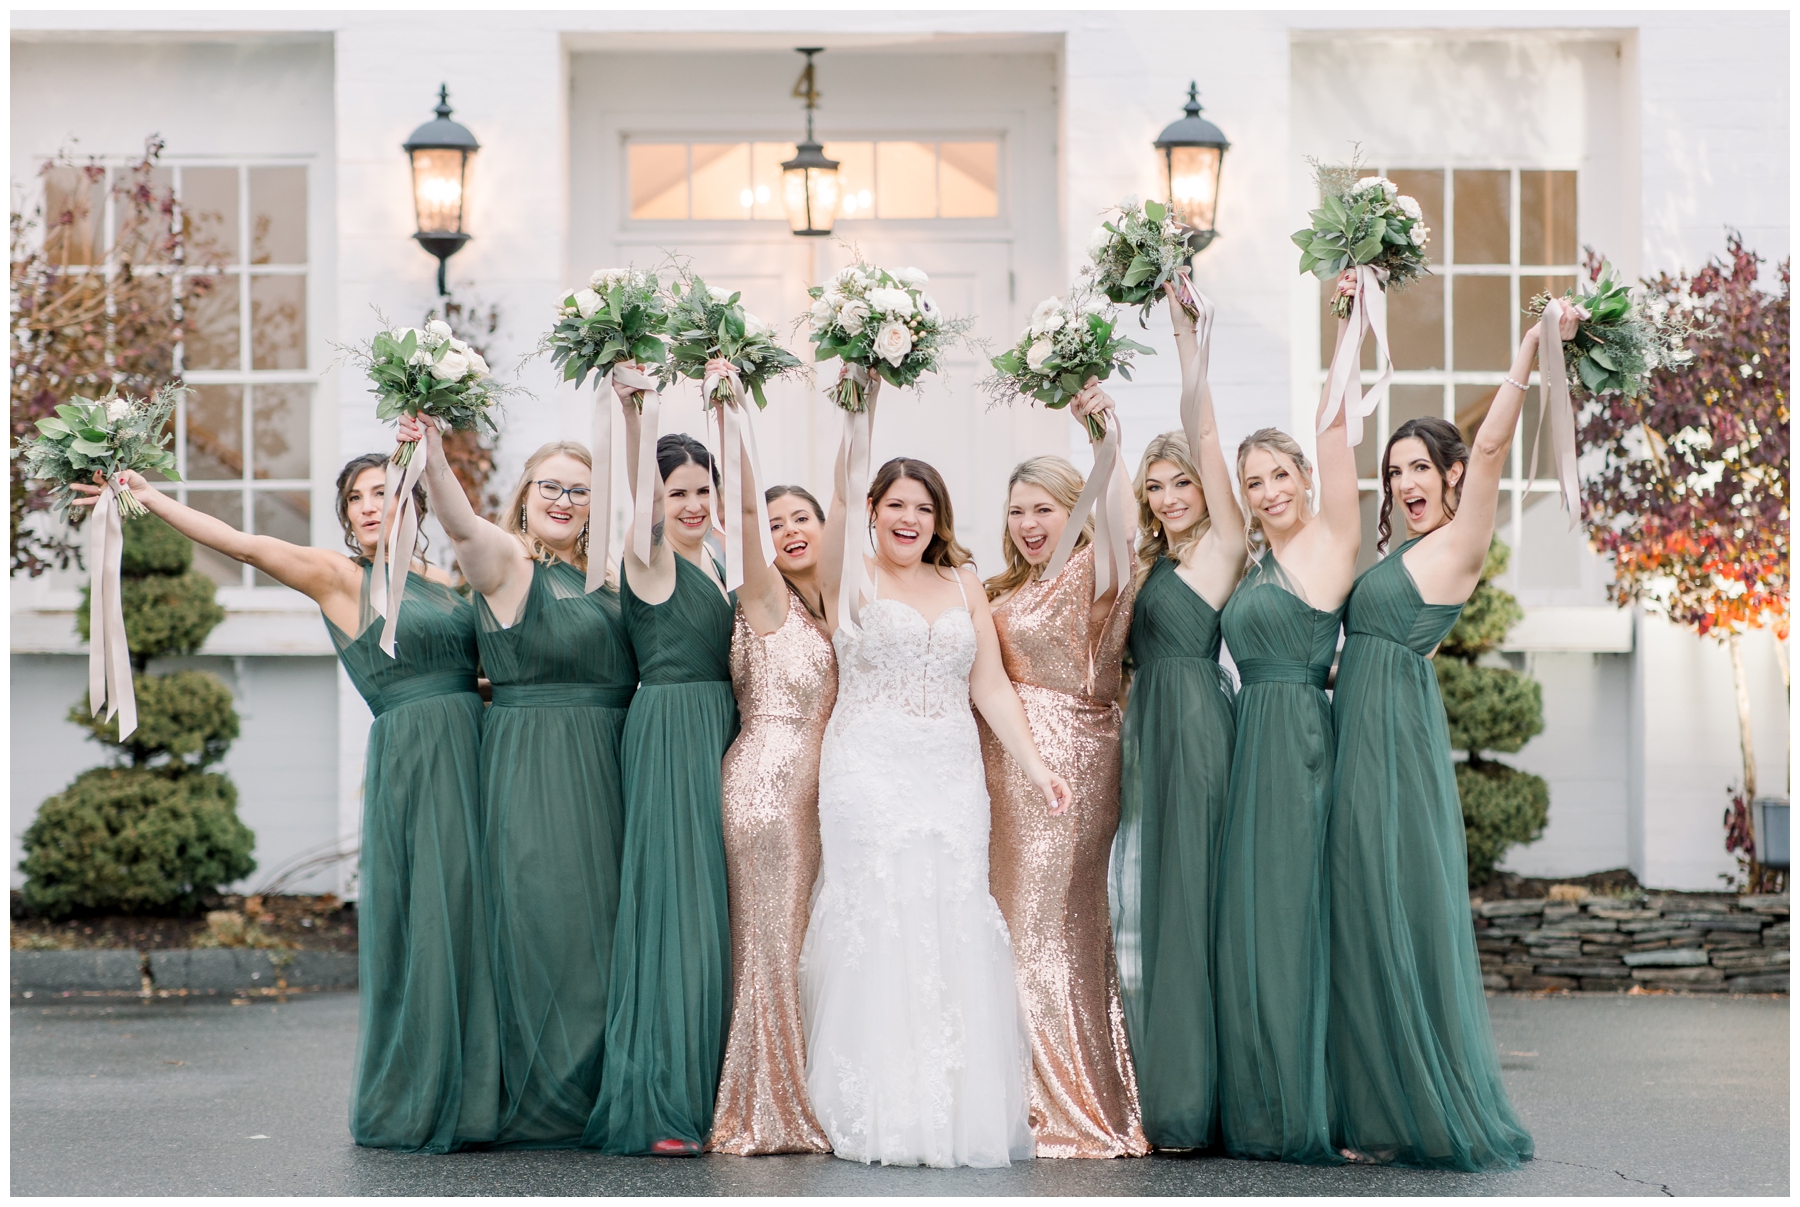 Bridesmaids pose for photo with flowers in air